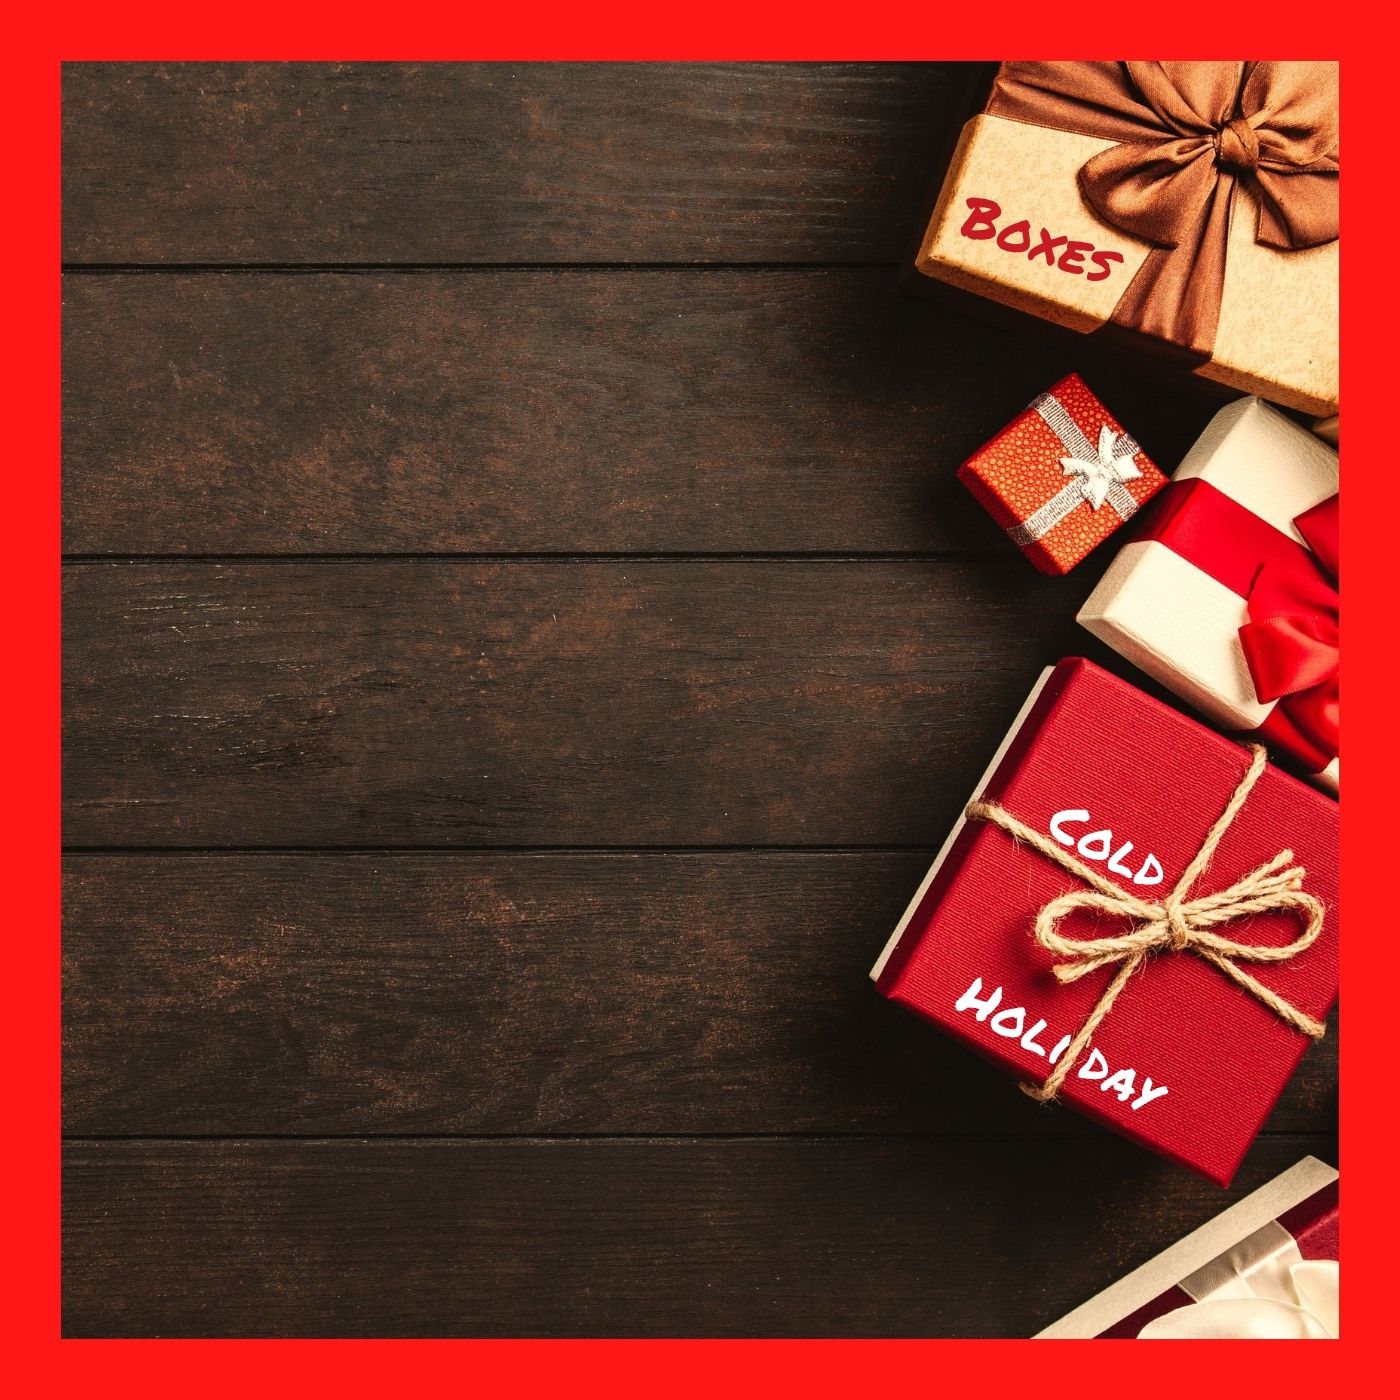 The cover of the "Boxes" single by Cold Holiday. It shows some red and gold wrapped presents on a dark brown wooden background.